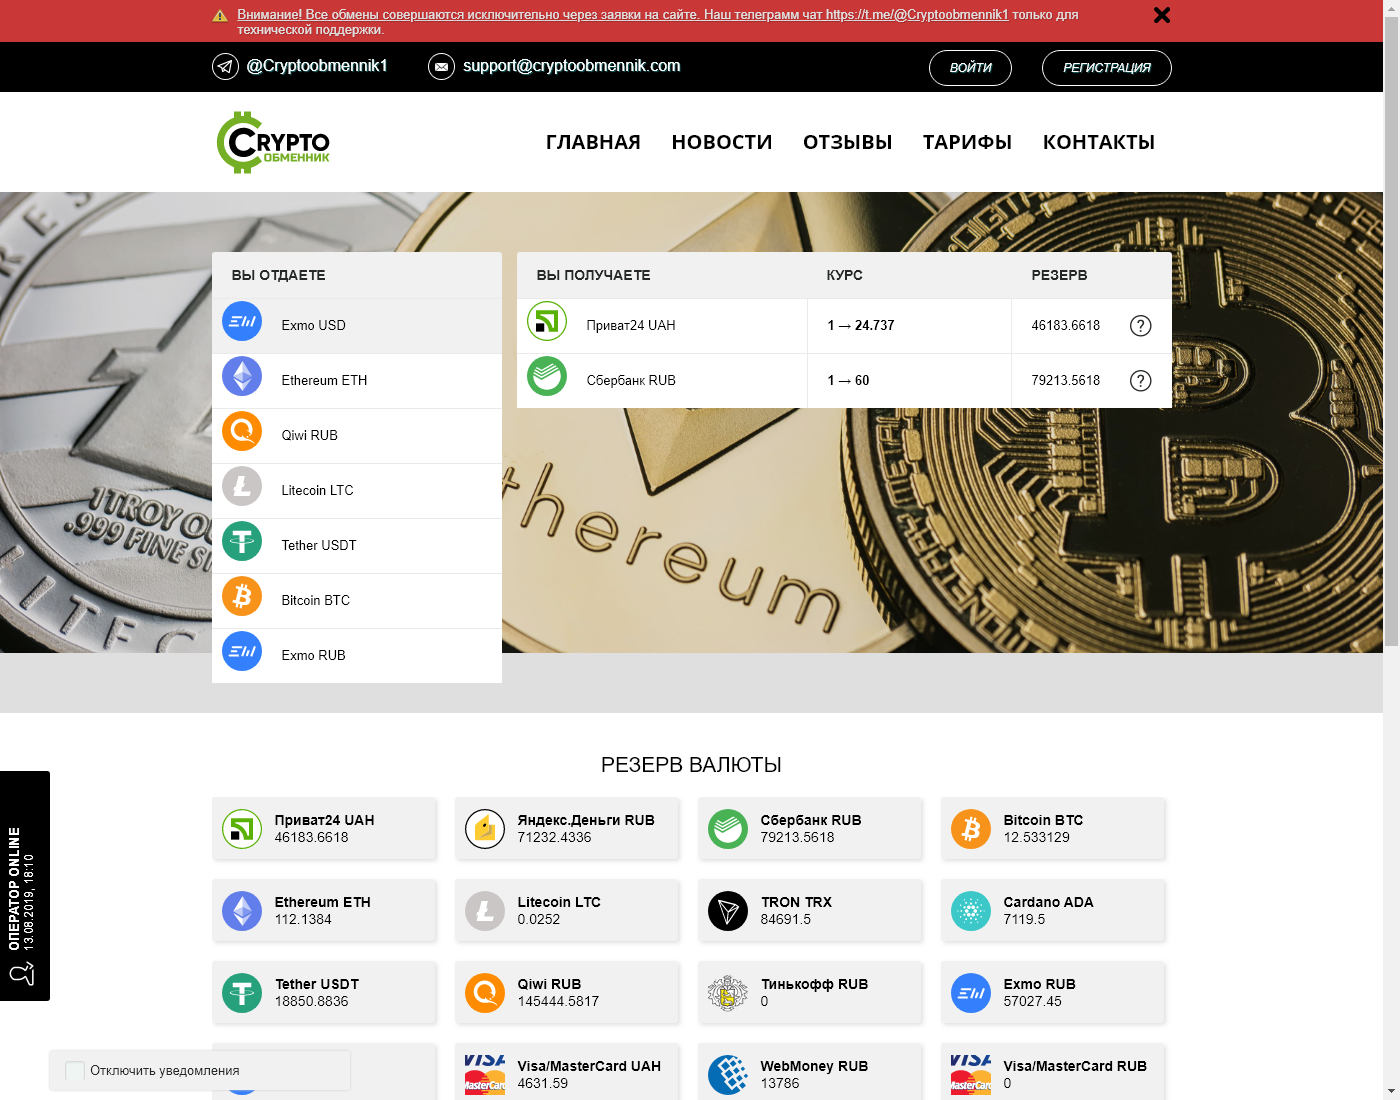 CryptoObmennik user interface: the home page in English